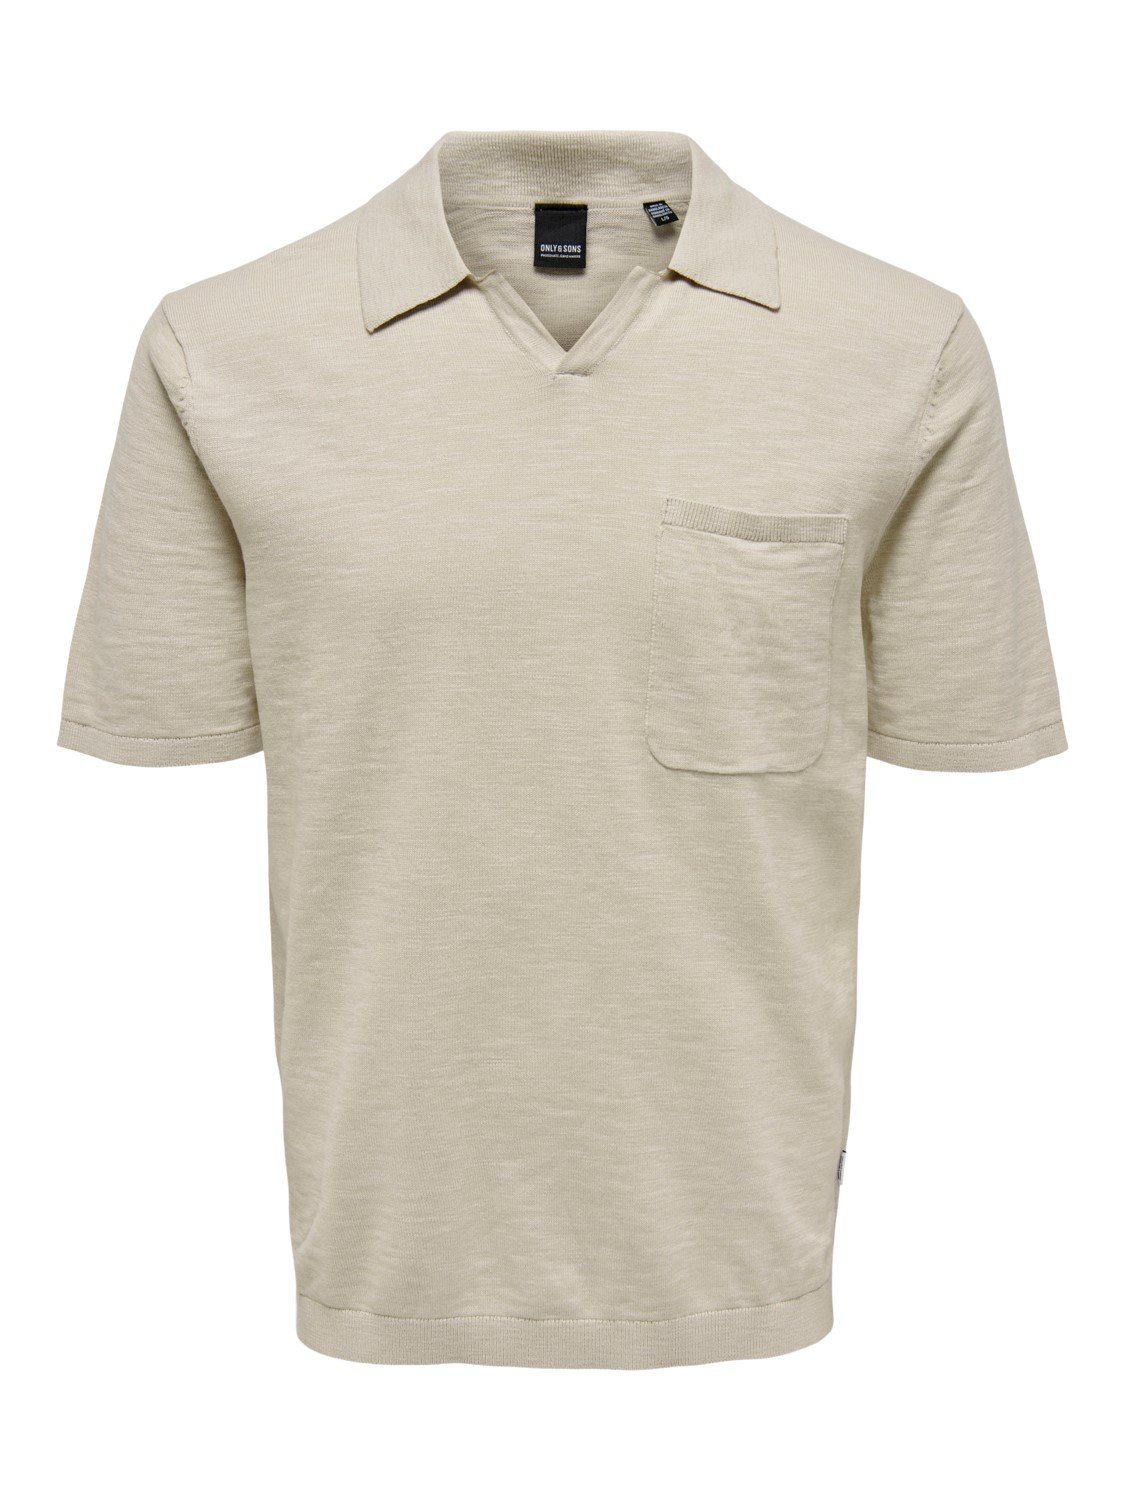 Einfarbiges ONSACE Poloshirt Shirt Baumwolle 5025 aus Hemd in ONLY & SONS Beige Kurzarm Polo